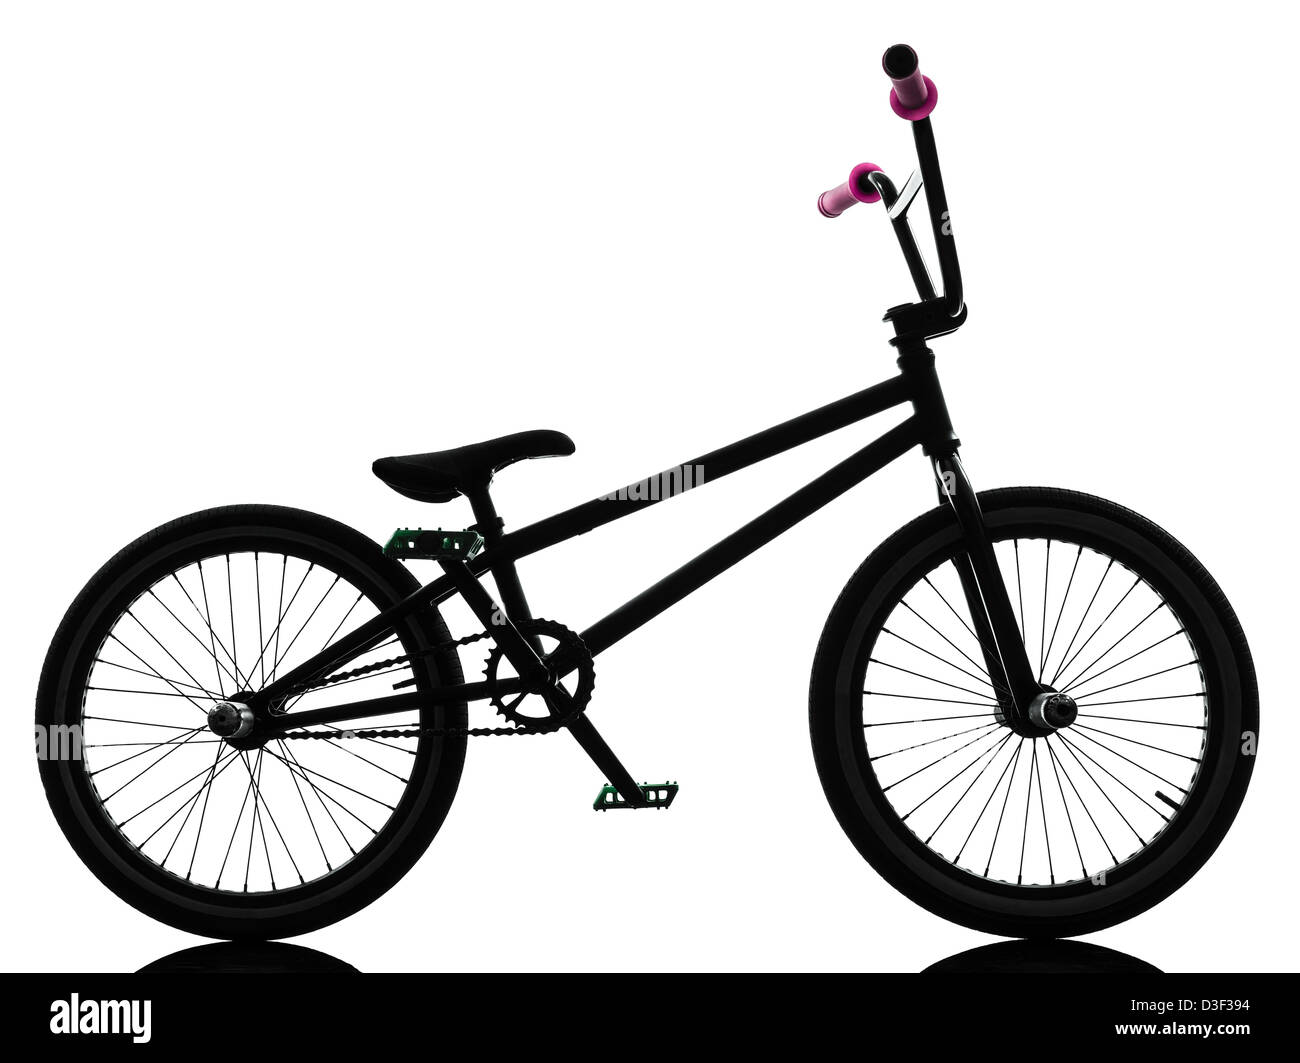 one bmx bicycle in silhouette studio isolated on white background Stock Photo